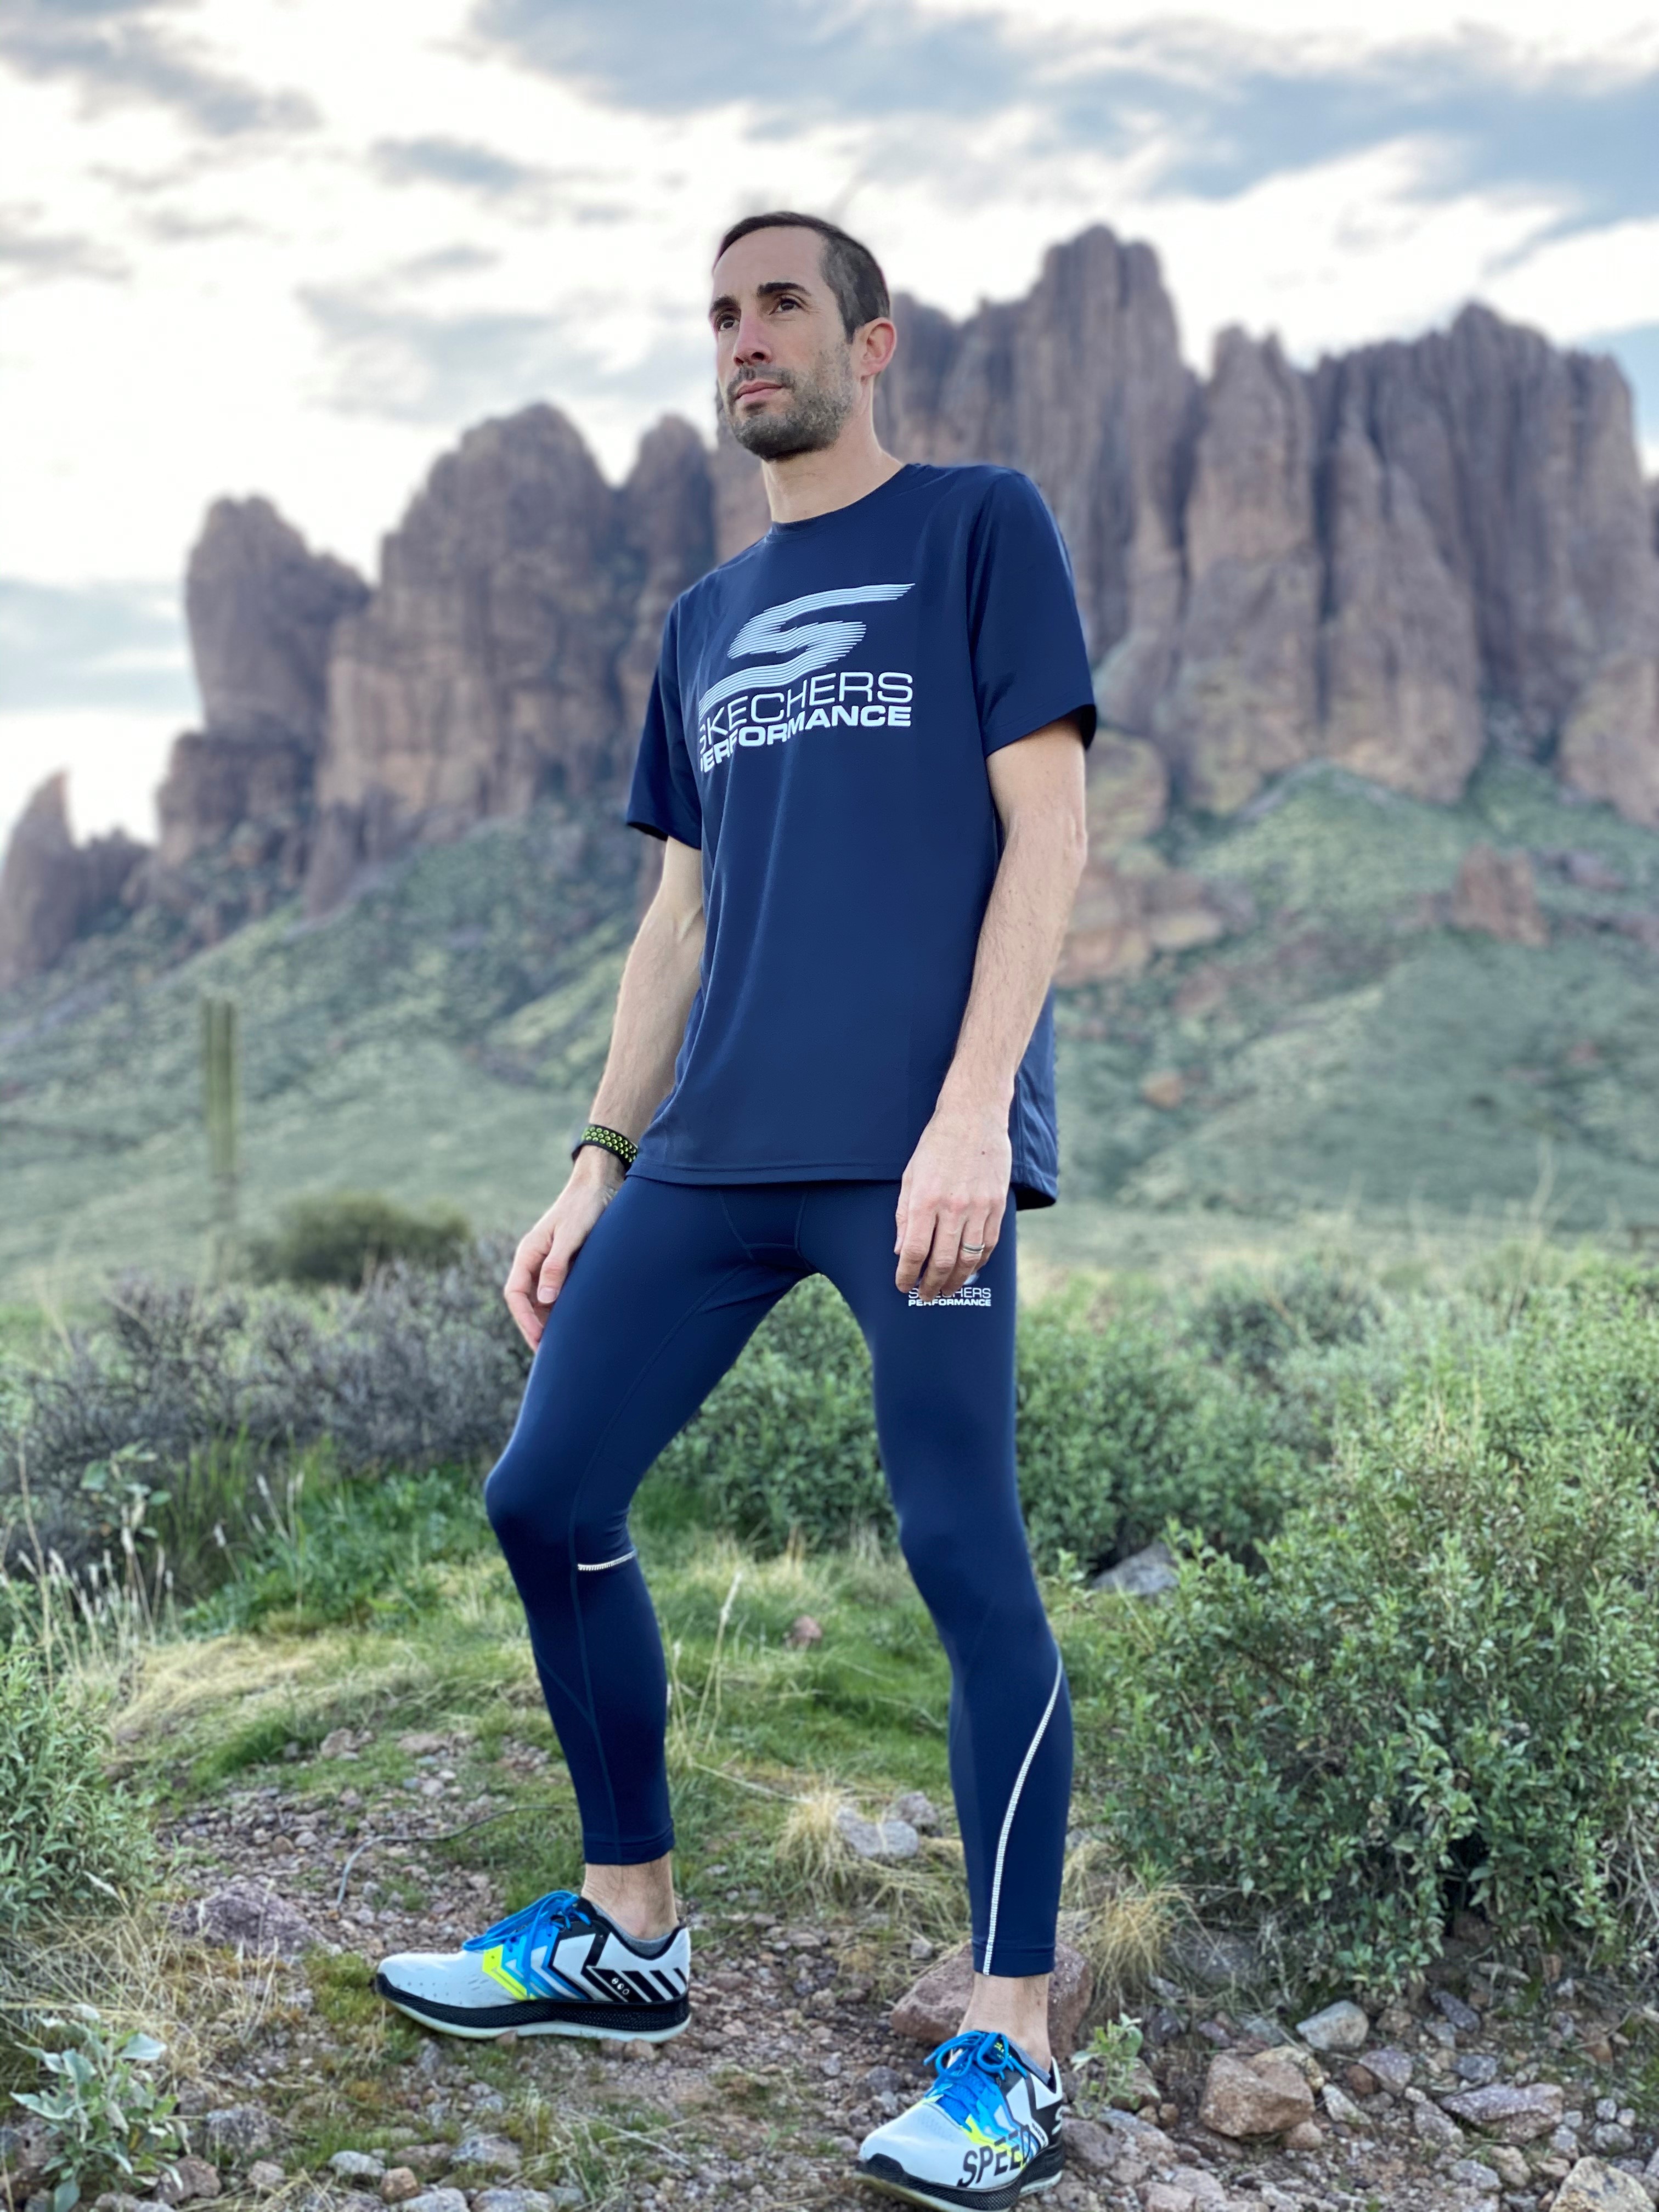 Skechers Adds Speed to the Team Signing 